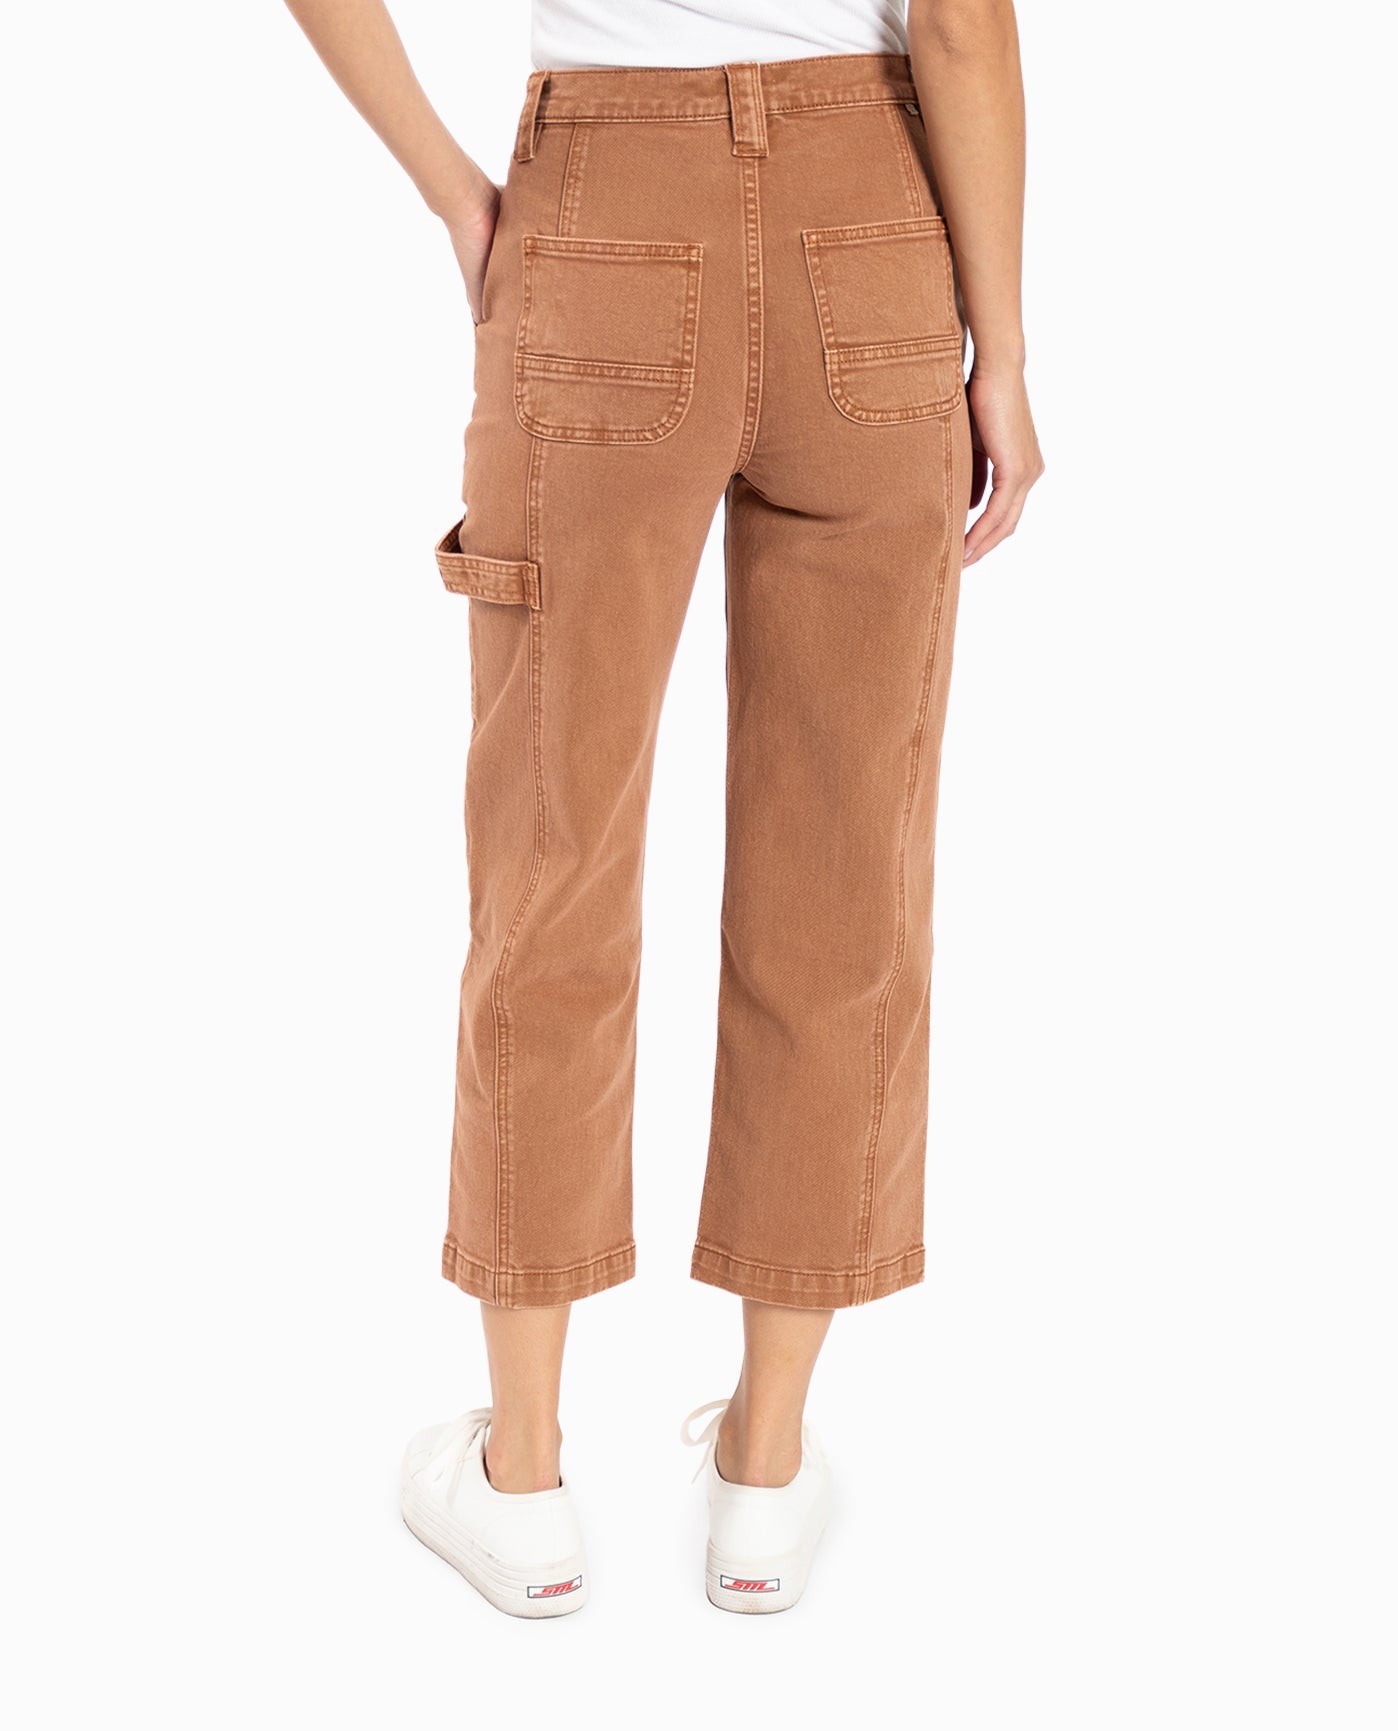 BACK OF HIGH RISE WIDE LEG ANKLE JEAN | Cinnamon Wash